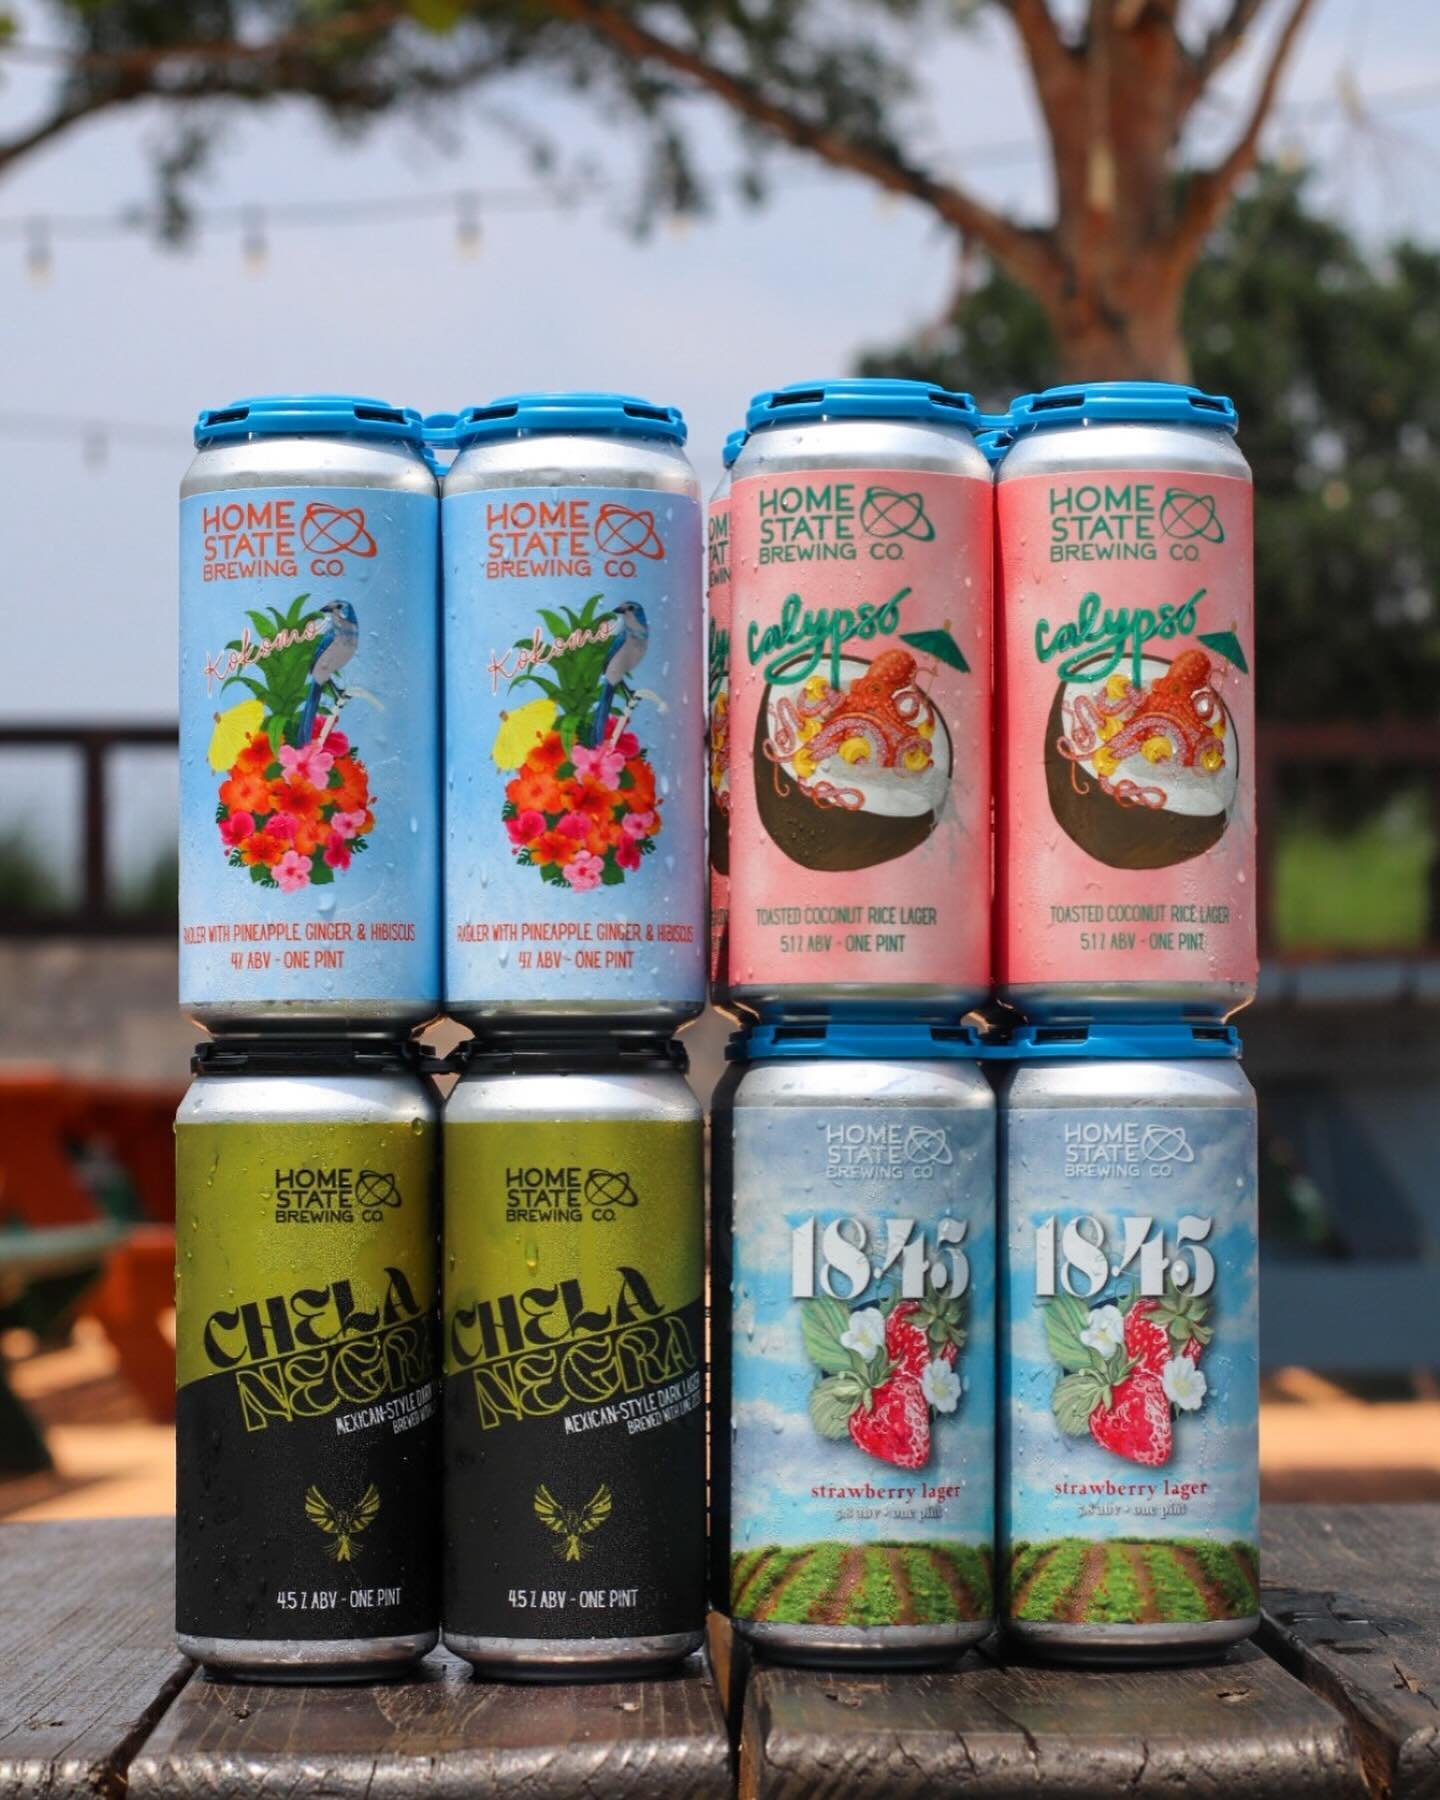 ‼️QUADRUPLE CAN DROP TOMORROW‼️

🌺Kokomo🌺
Radler w/ pineapple, hibiscus &amp; ginger 
4% ABV

🥥Calypso🥥
Toasted coconut rice lager 
5.1% ABV

🍓1845: Strawberry Lager🍓
5.8% ABV 

🍋&zwj;🟩Chela Negra🍋&zwj;🟩
Dark Mexican lager w/ lime zest 
4.5